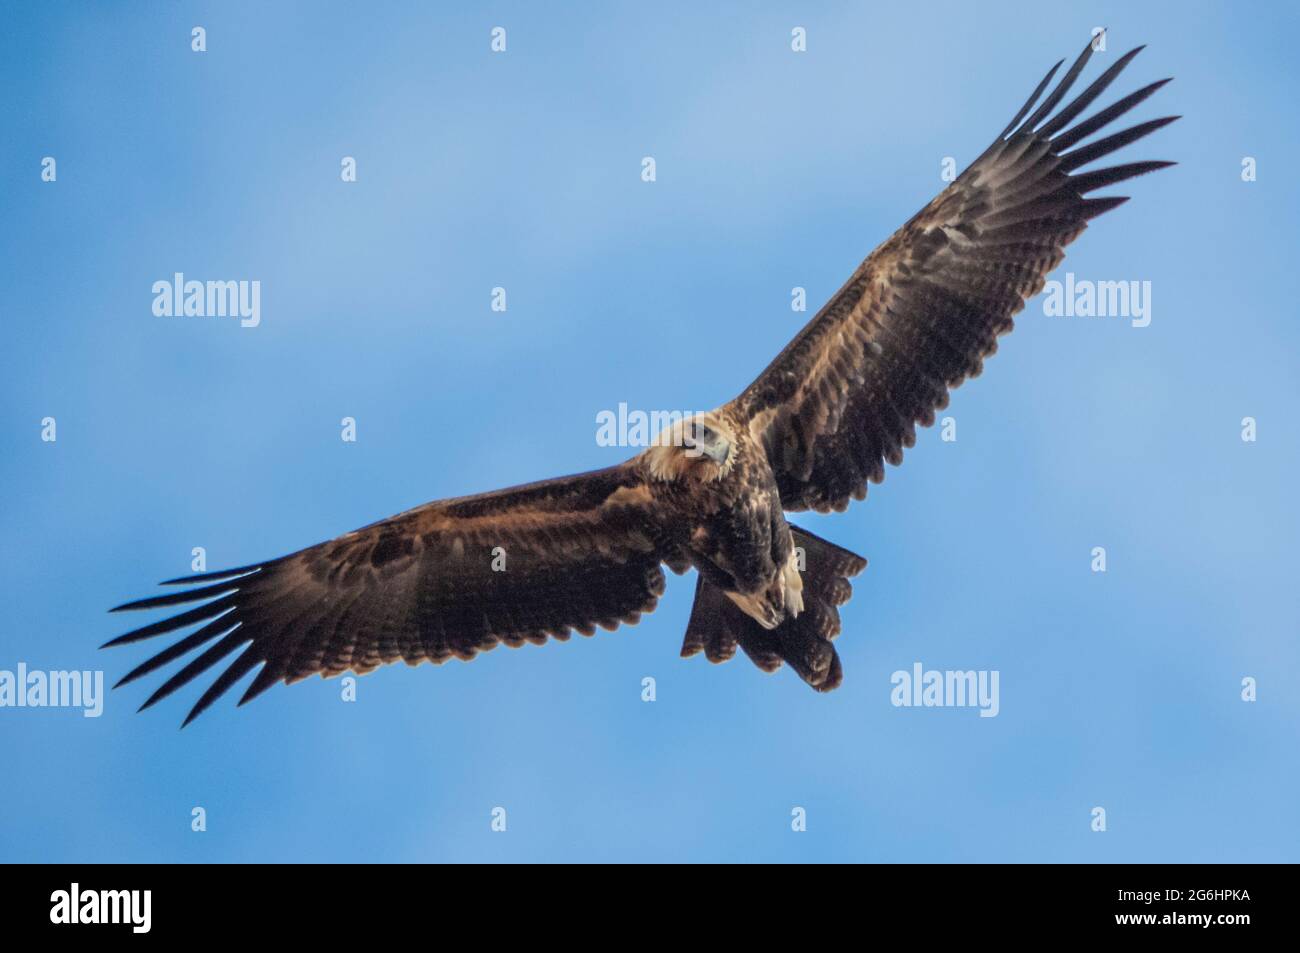 An Immature wedge-tailed Eagle in flight Stock Photo